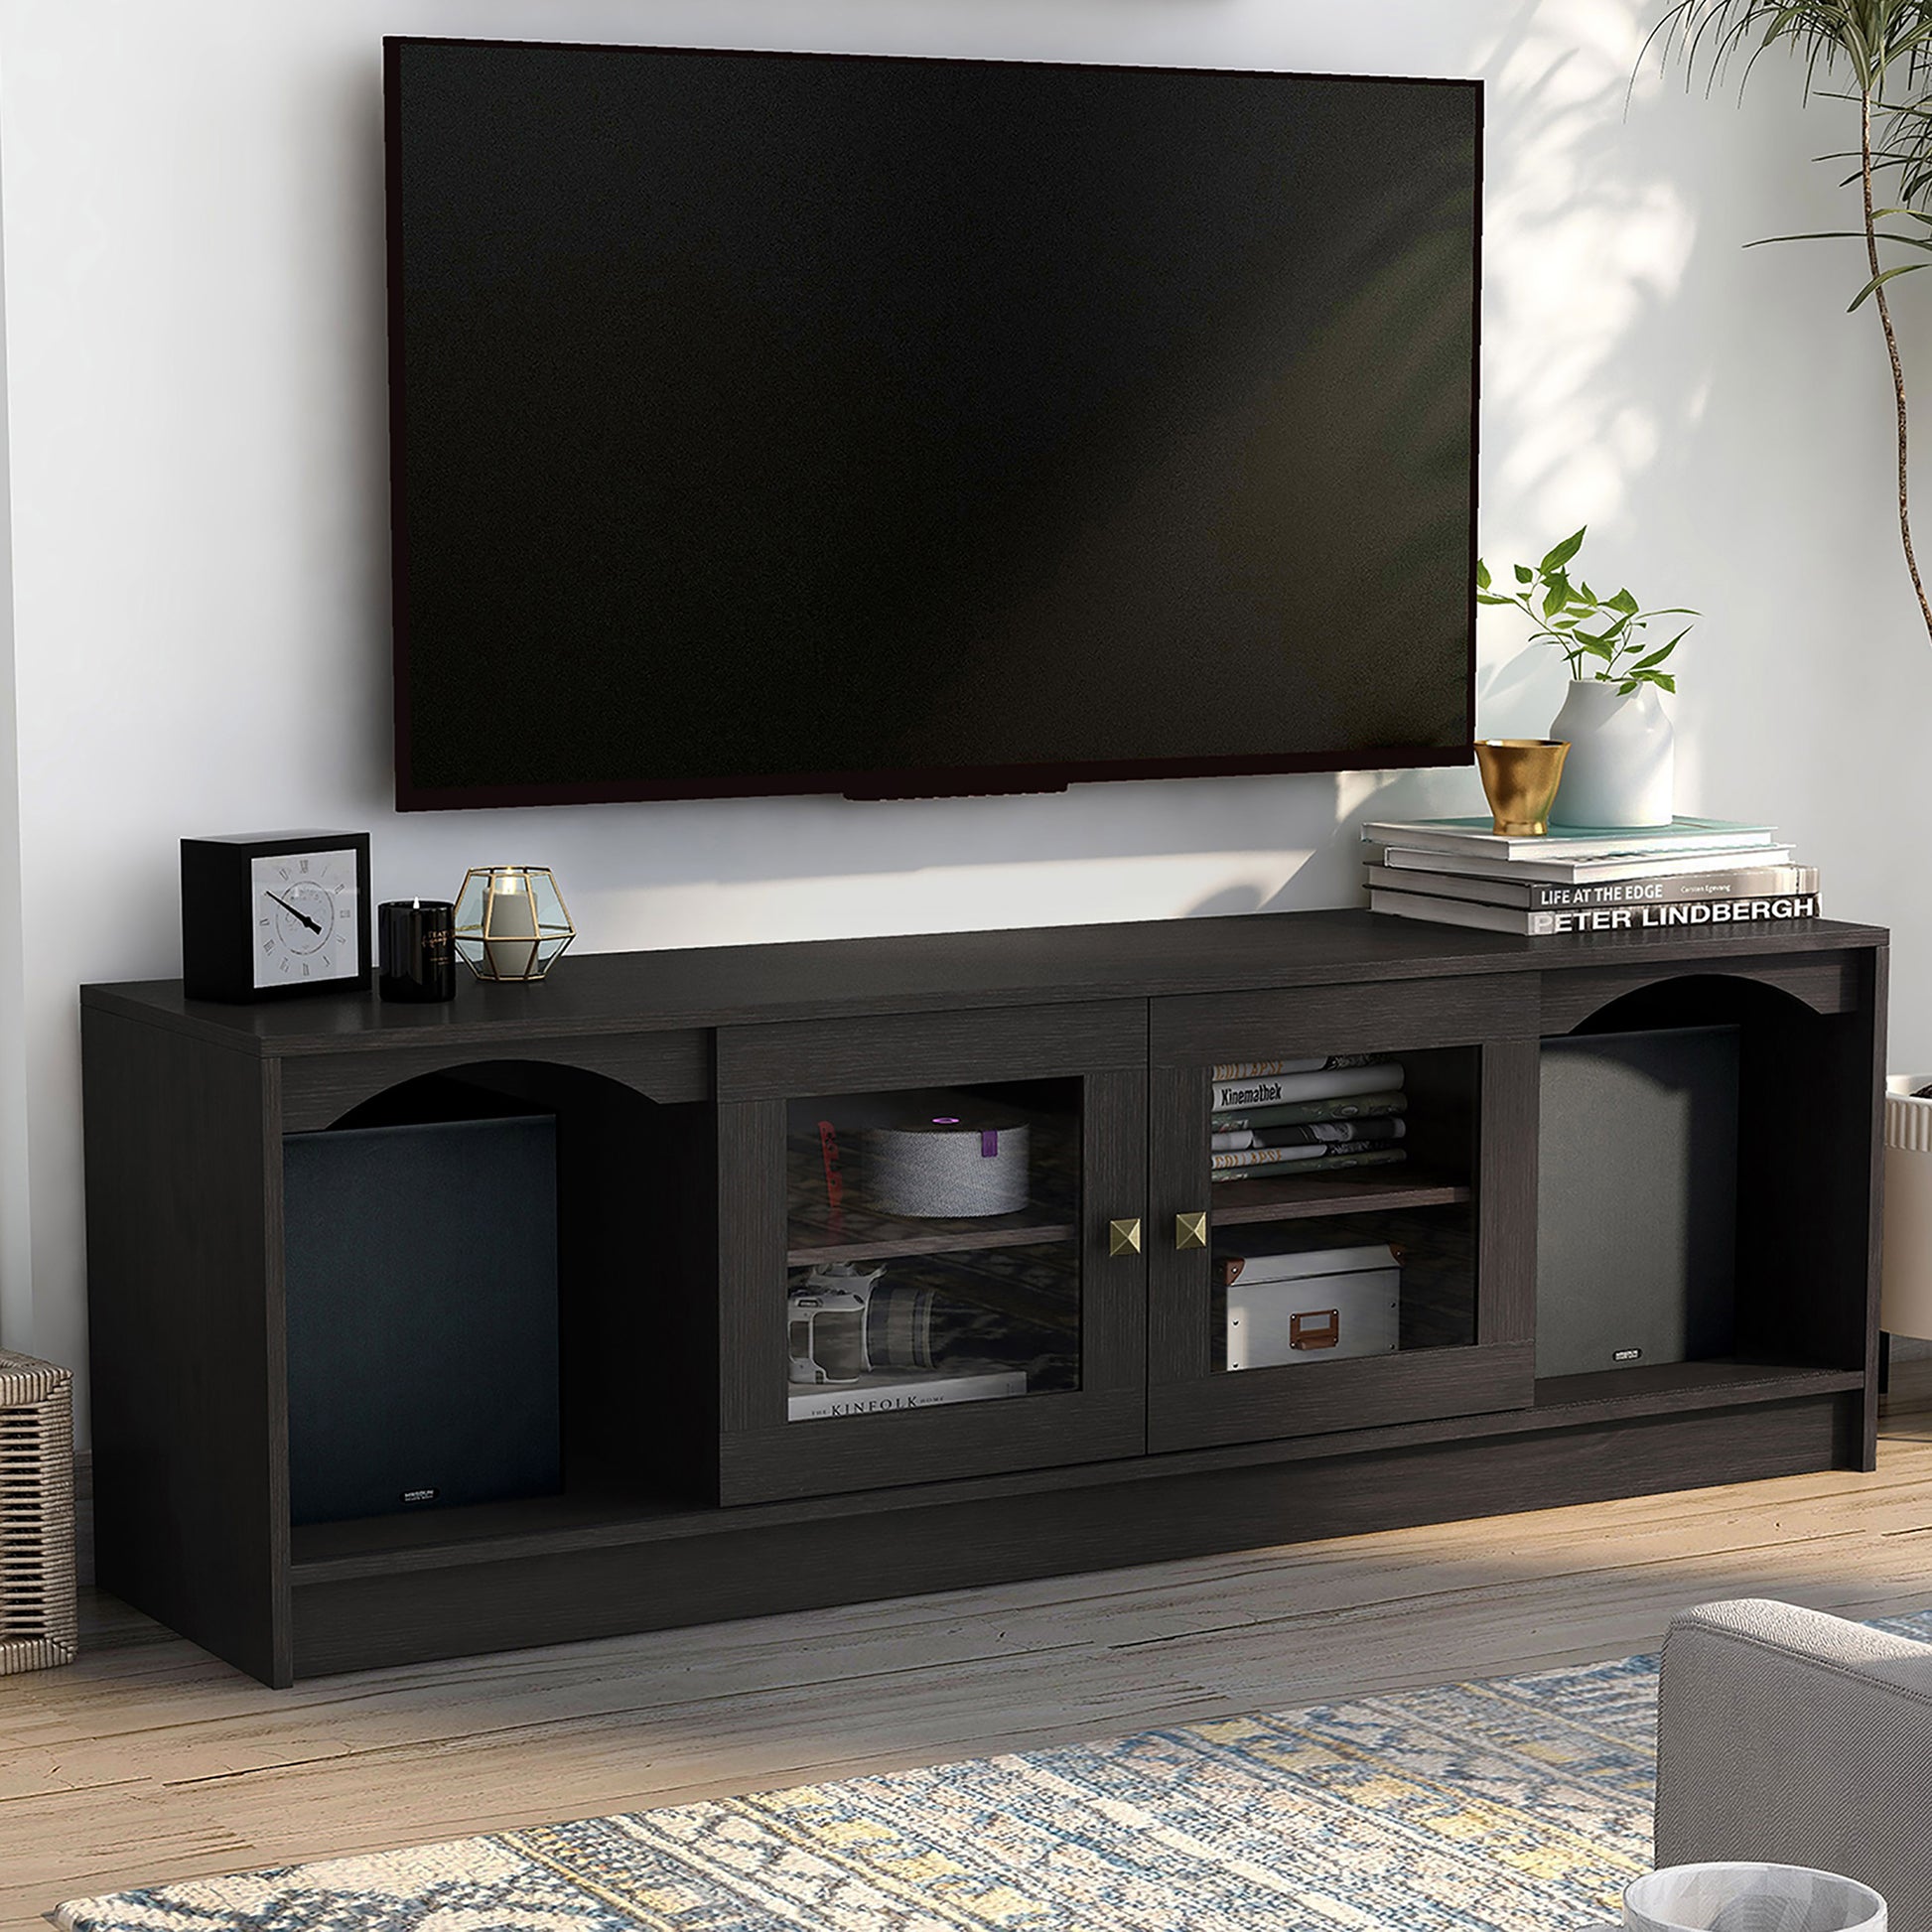 Right angled transitional espresso two-sliding door TV stand in a living room with accessories